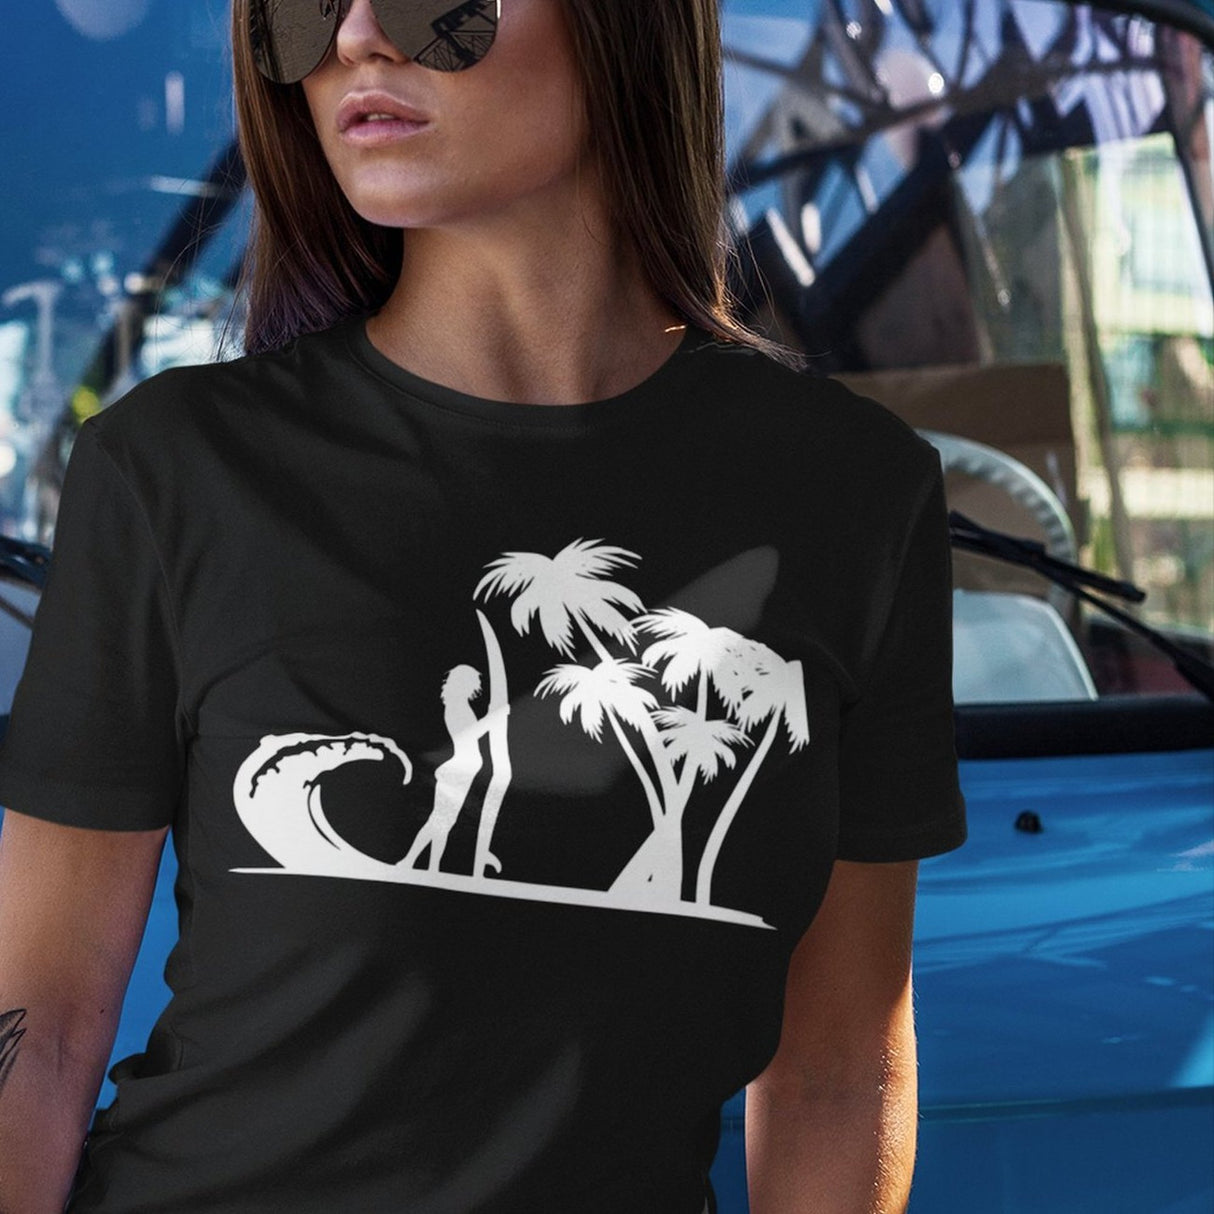 surfer-standing-on-beach-with-wave-and-palm-trees-surf-tee-beach-t-shirt-surfer-tee-beach-t-shirt-surfing-tee#color_black